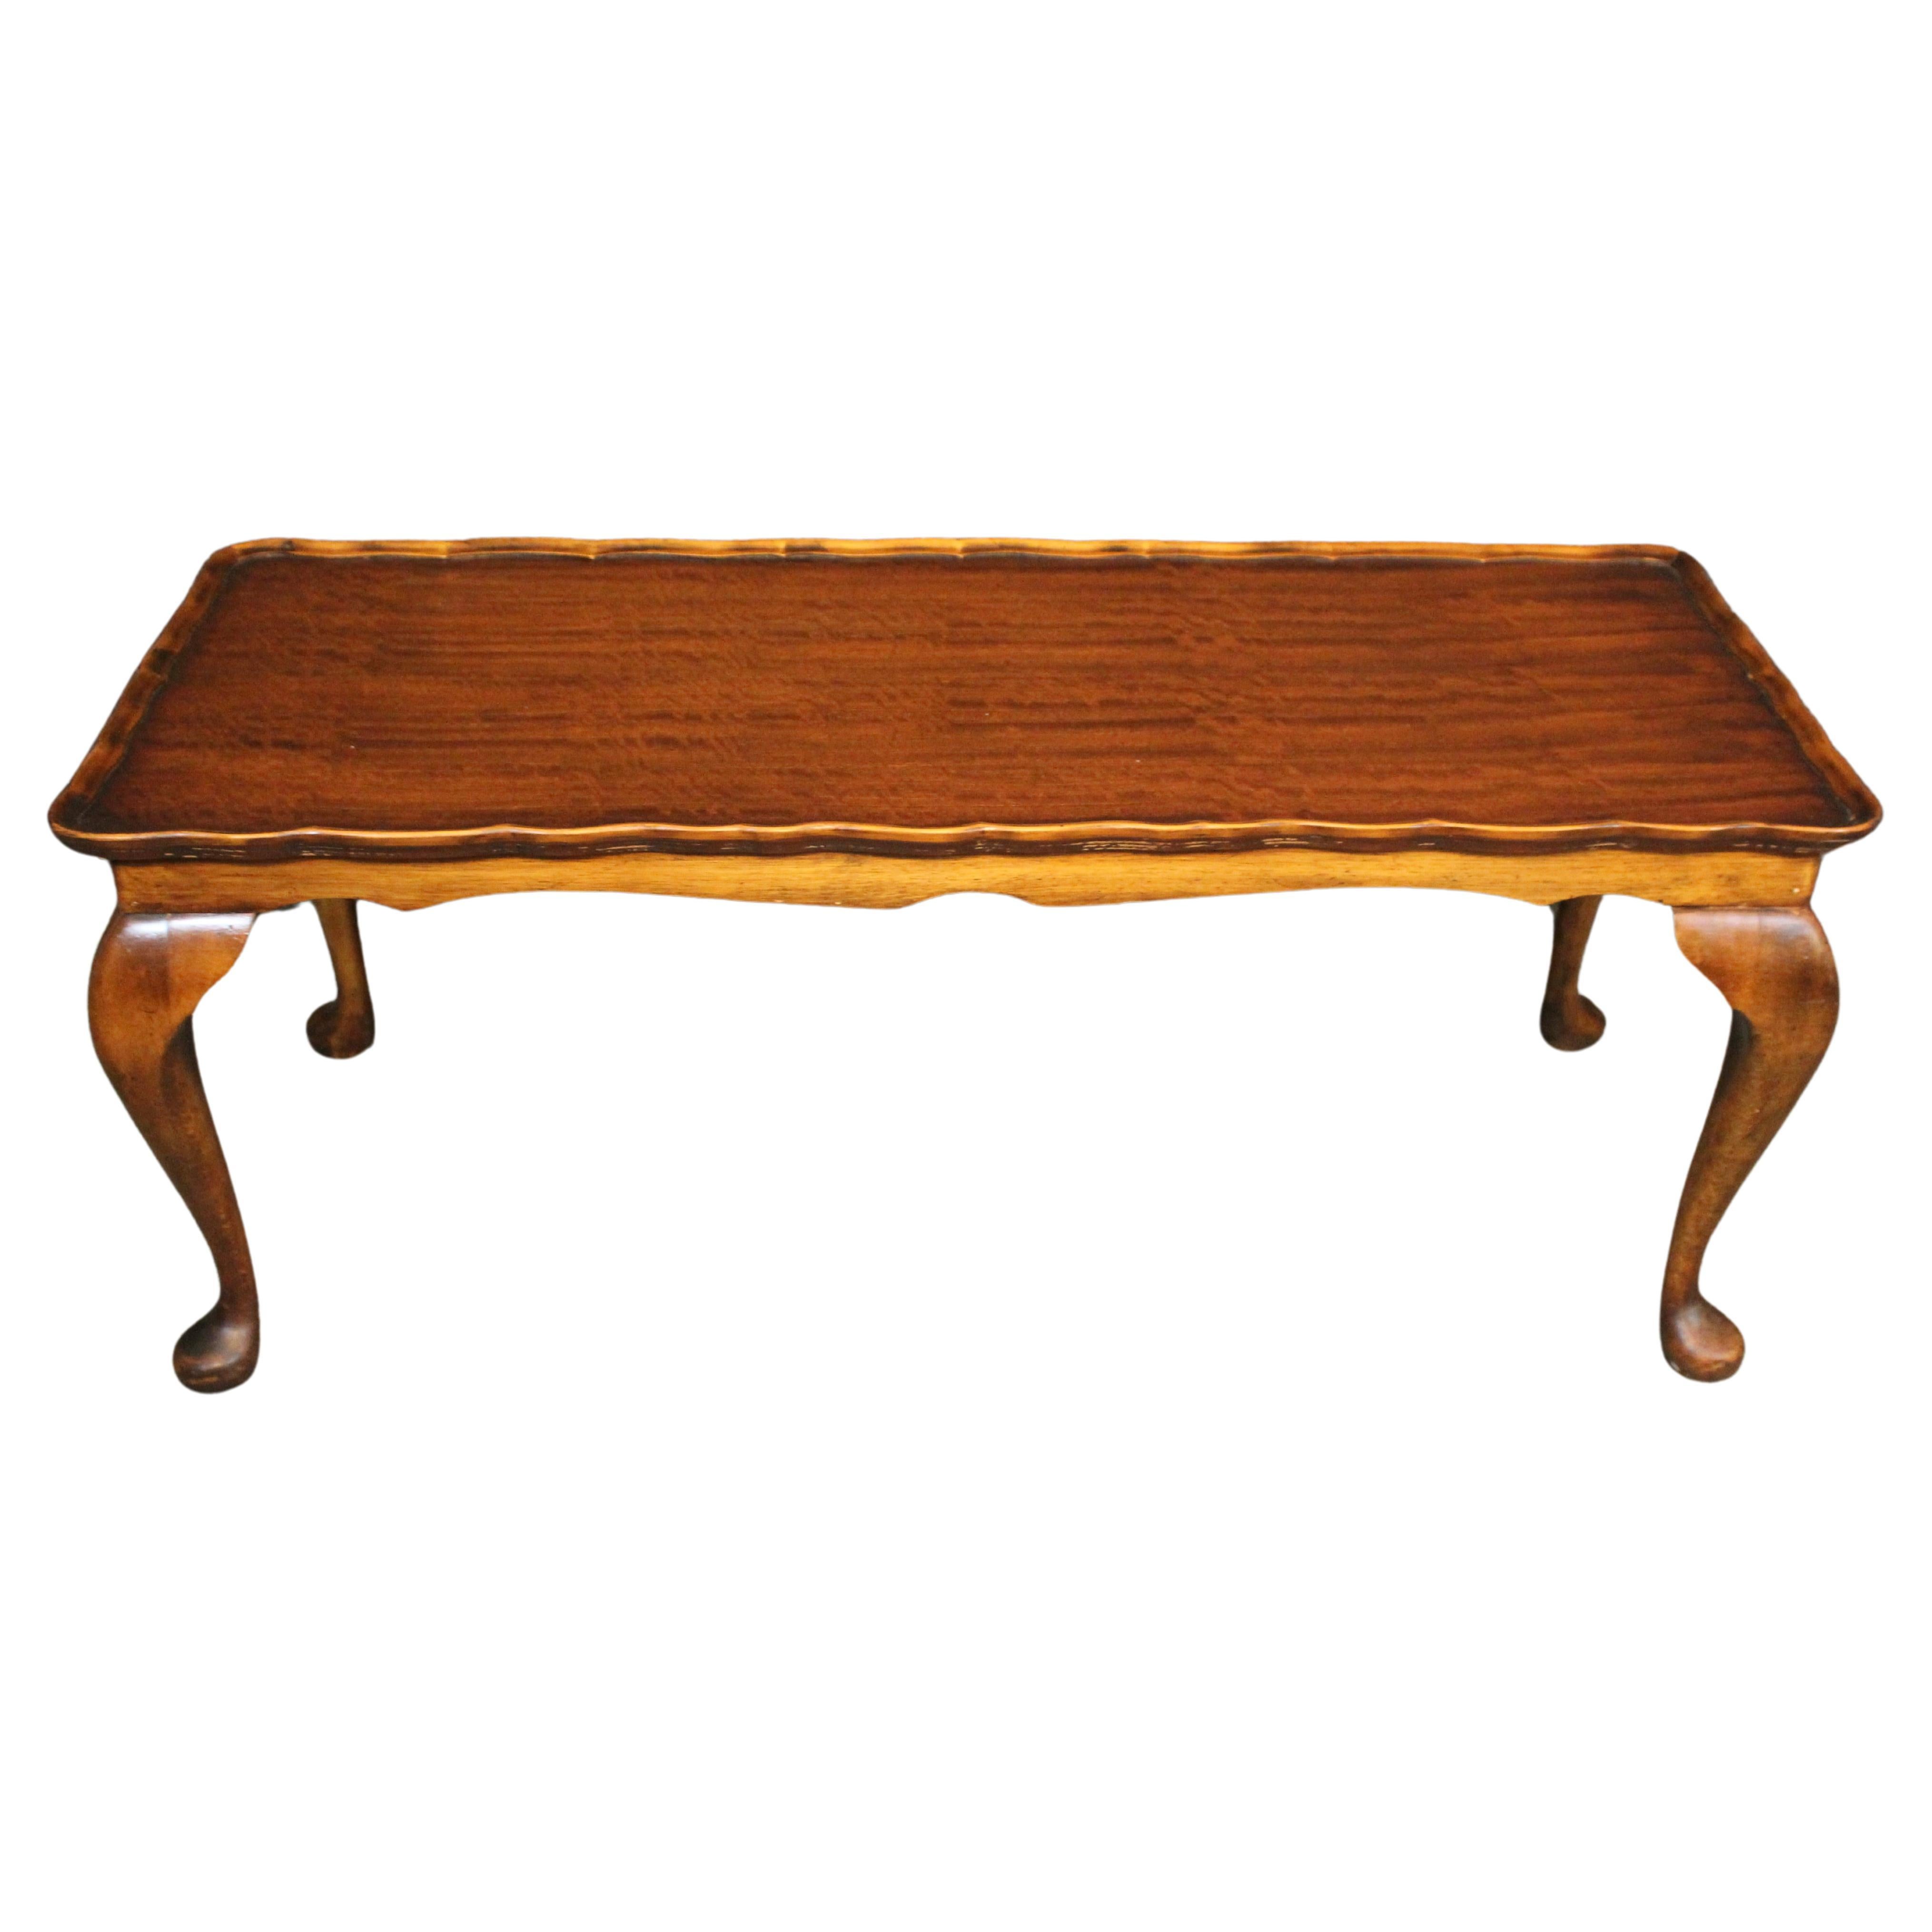 Mahogany Cabriole Table by Bevan Funnell for Reprodux England For Sale